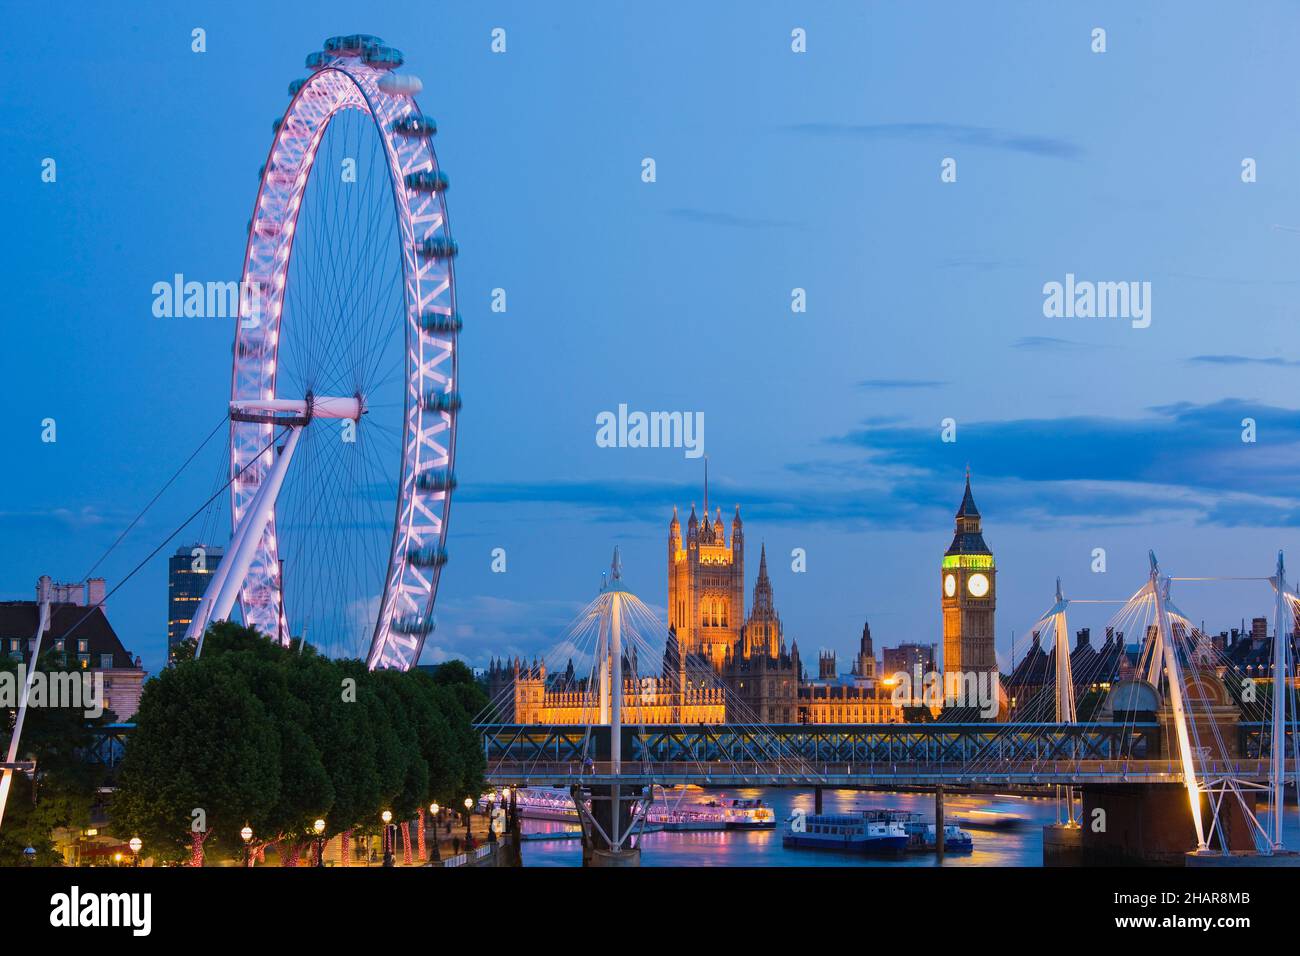 The London Eye, Houses of Parliament and the Thames River, London, United Kingdom Stock Photo